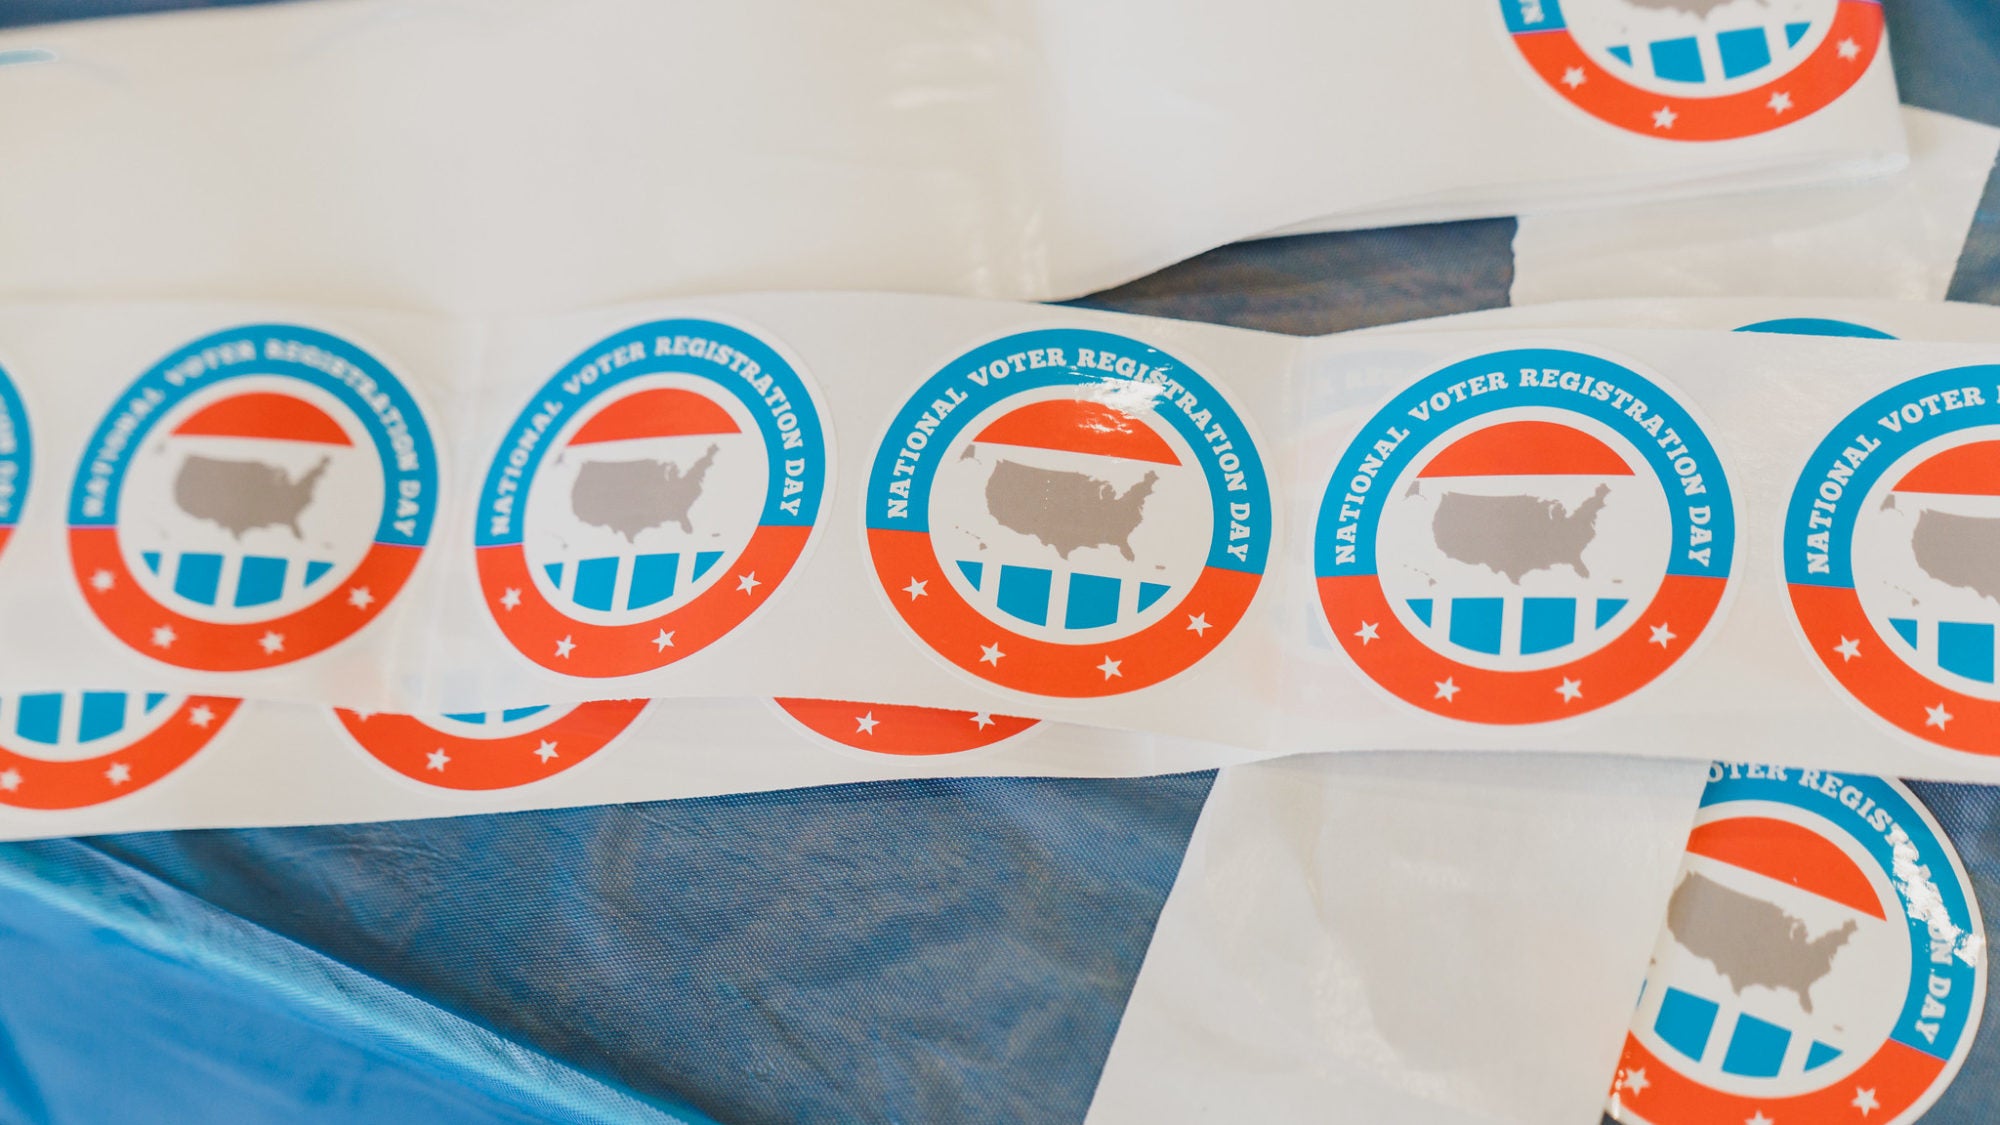 voter registration stickers on a table